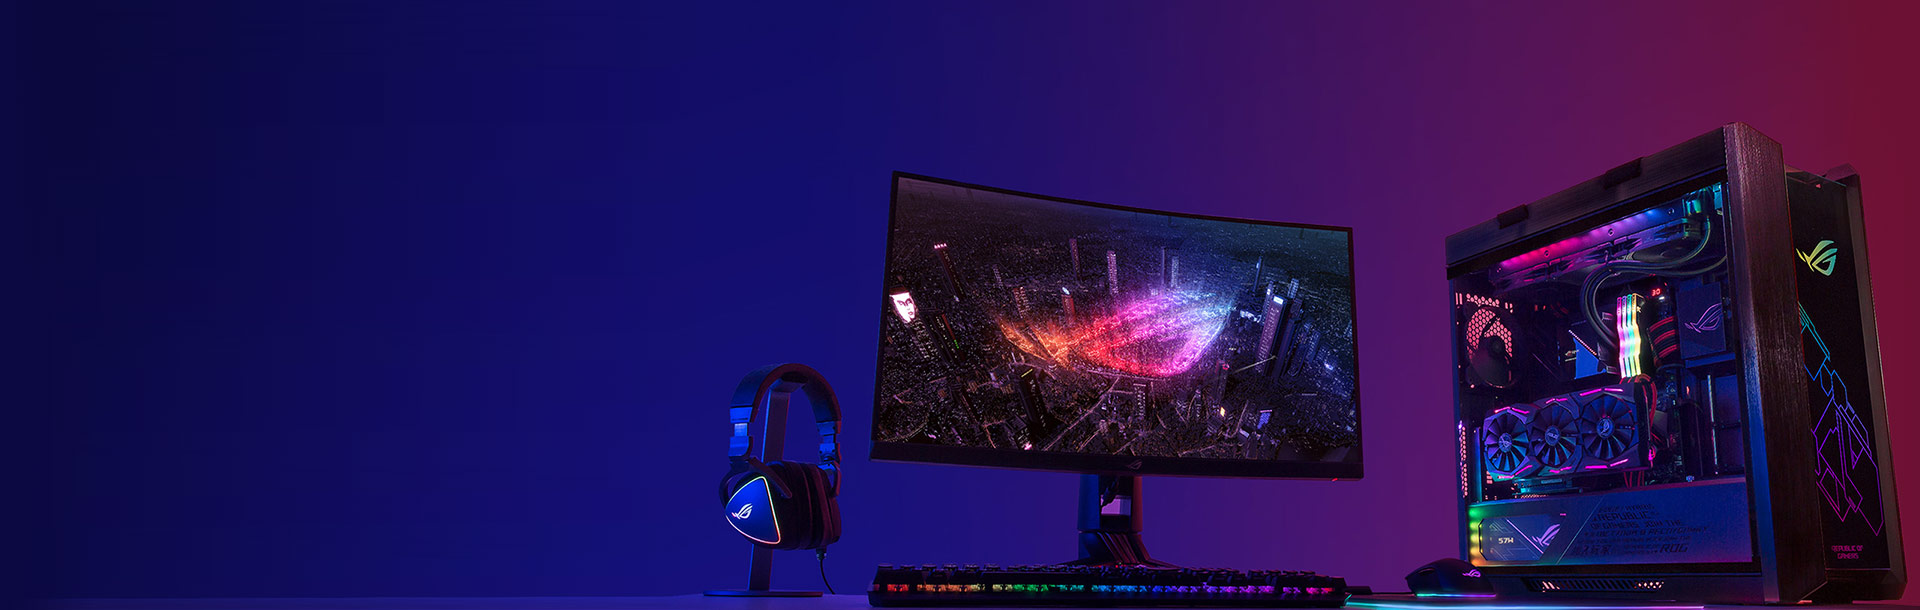 ROG Strix B660-F Gaming WiFi features diverse ROG ecosystem